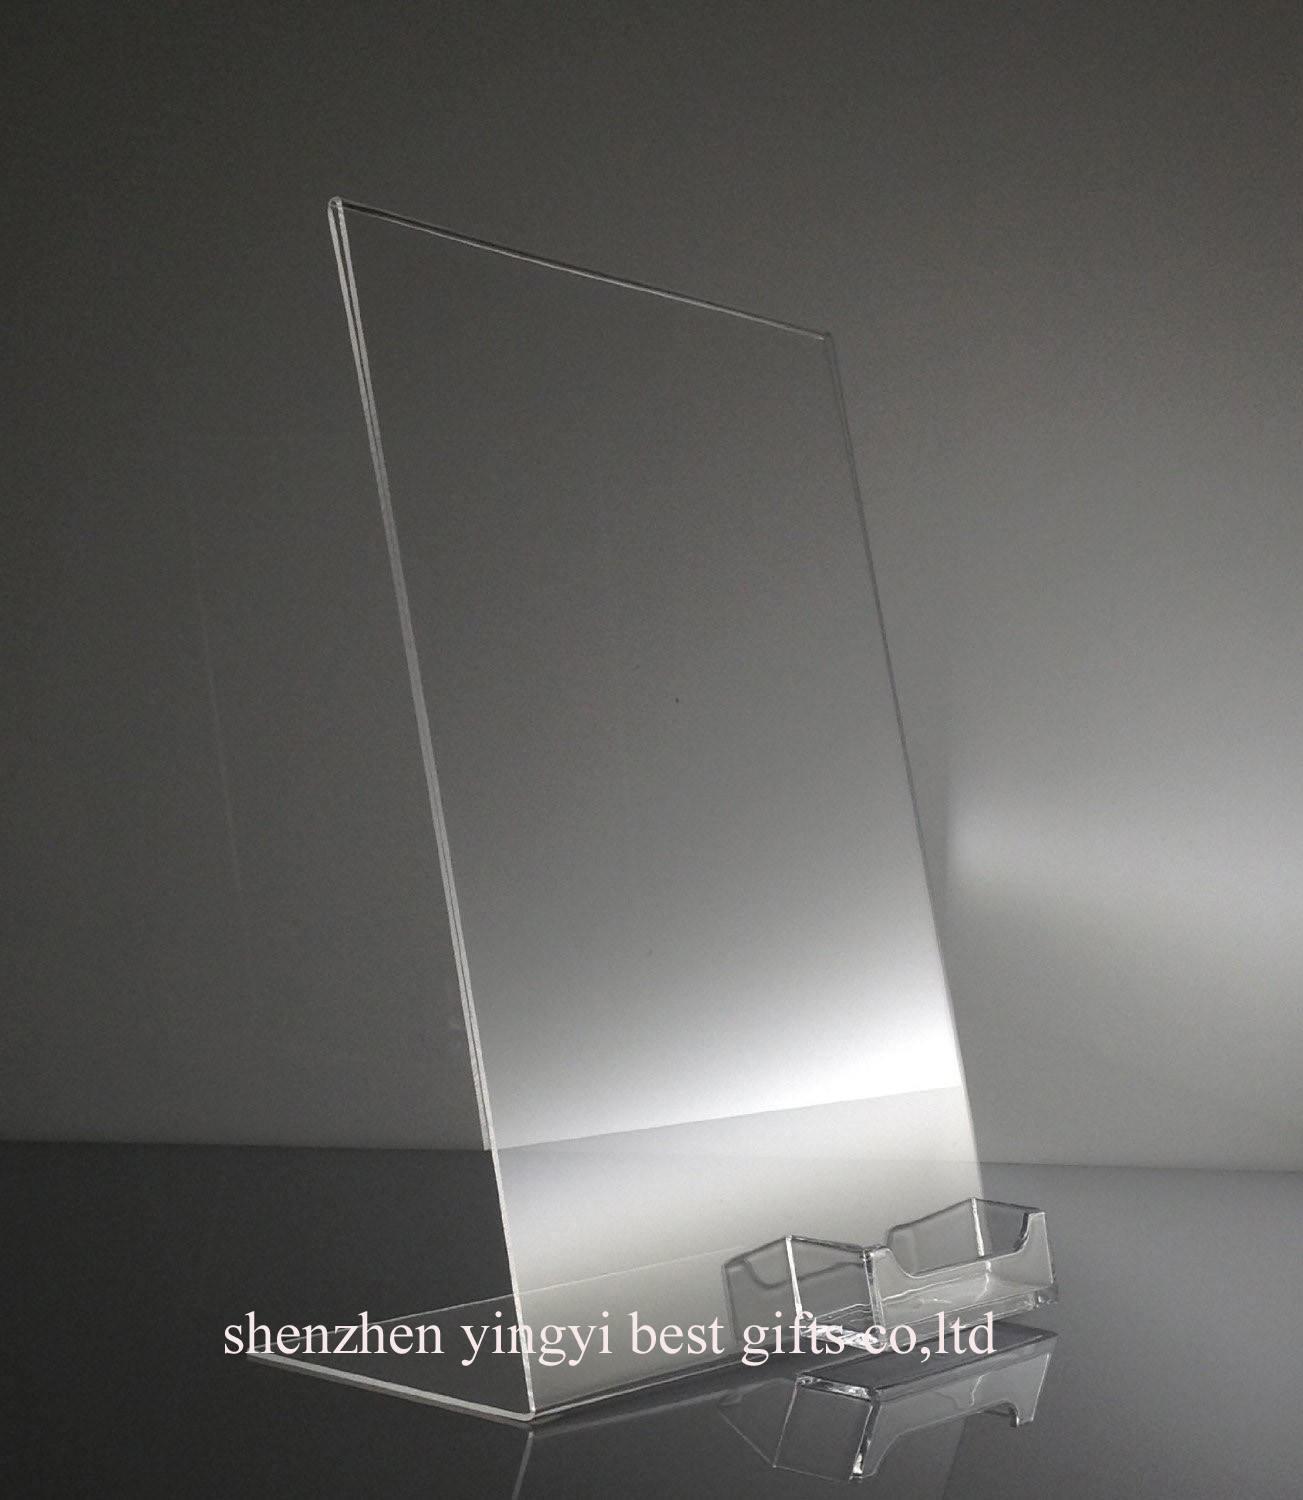 Quality 8.5"w X11"h Acrylic Slanted Sign Holders wholesale for sale